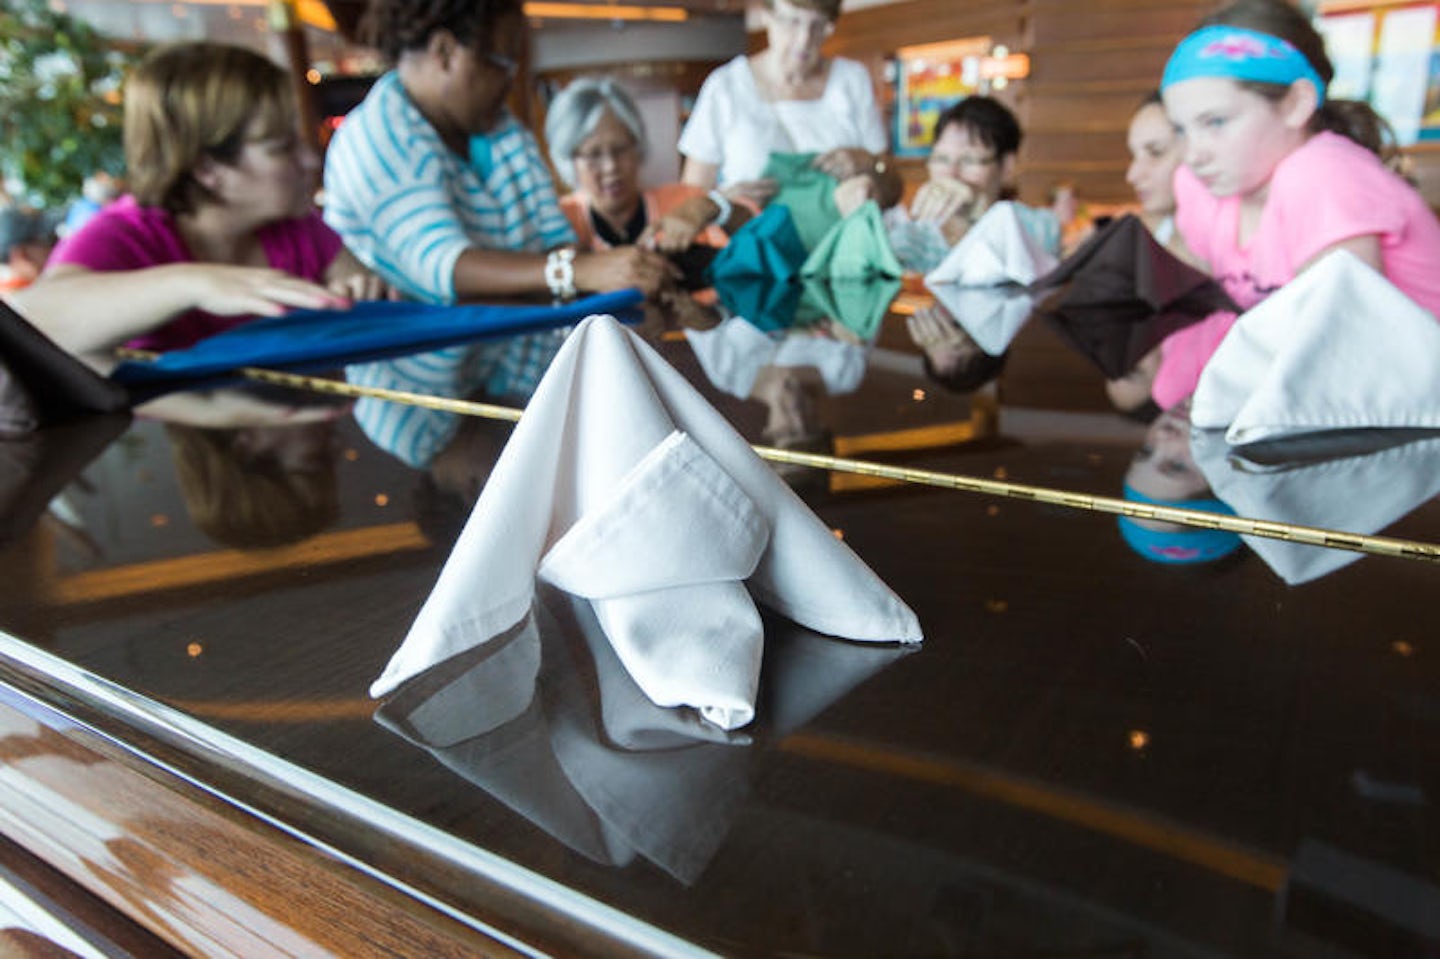 Napkin Artistry on Enchantment of the Seas